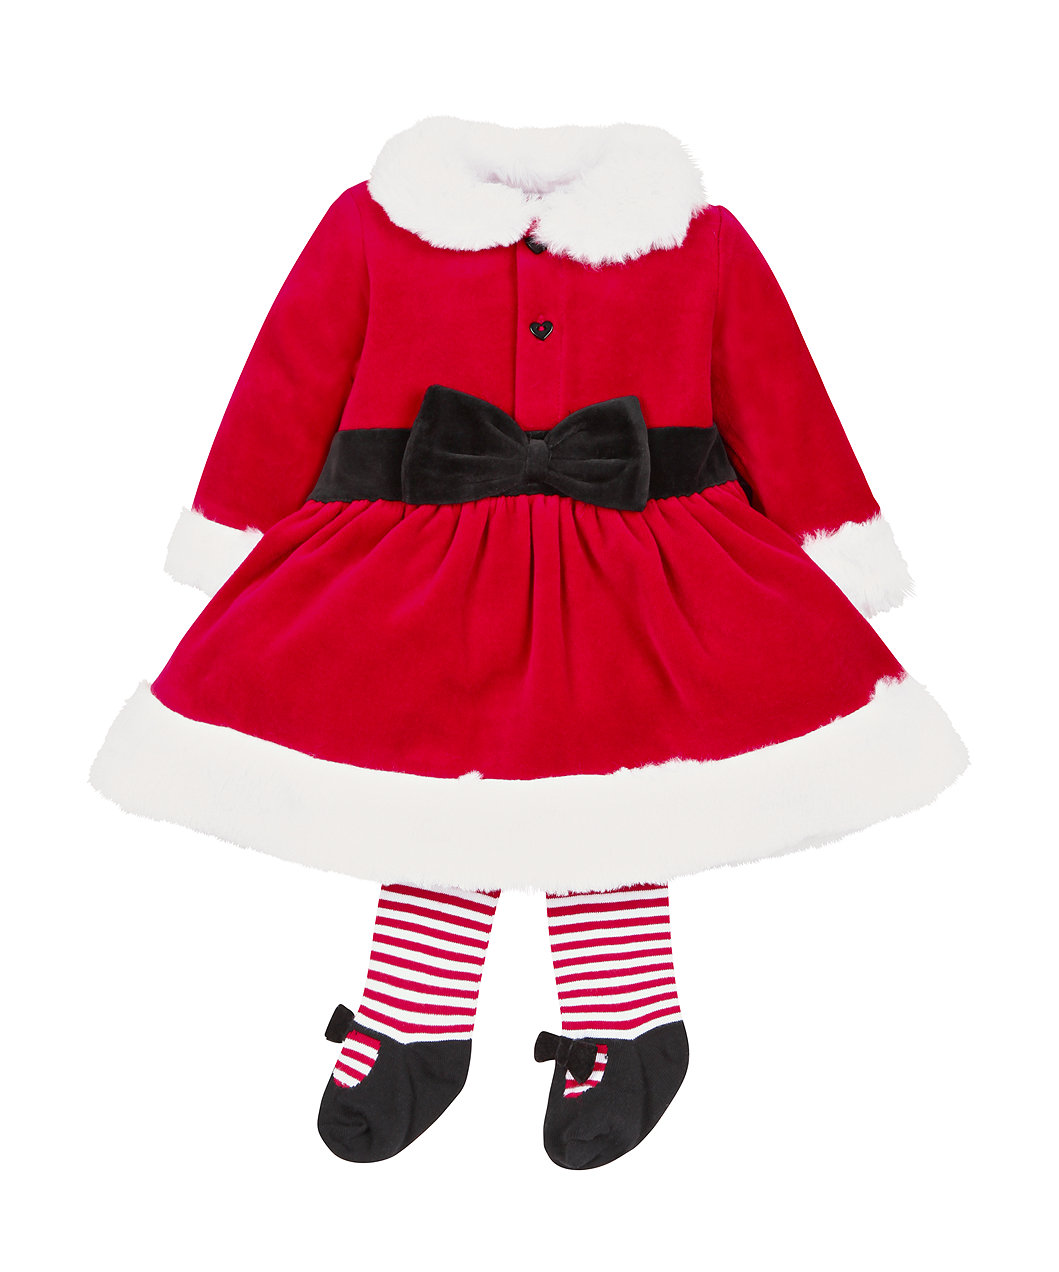 http://mothercare.scene7.com/is/image/MothercareASE/ljb898_1?&amp;$dw_large_mc$&amp;wid=1059&amp;hei=1272&amp;fit=fit,1